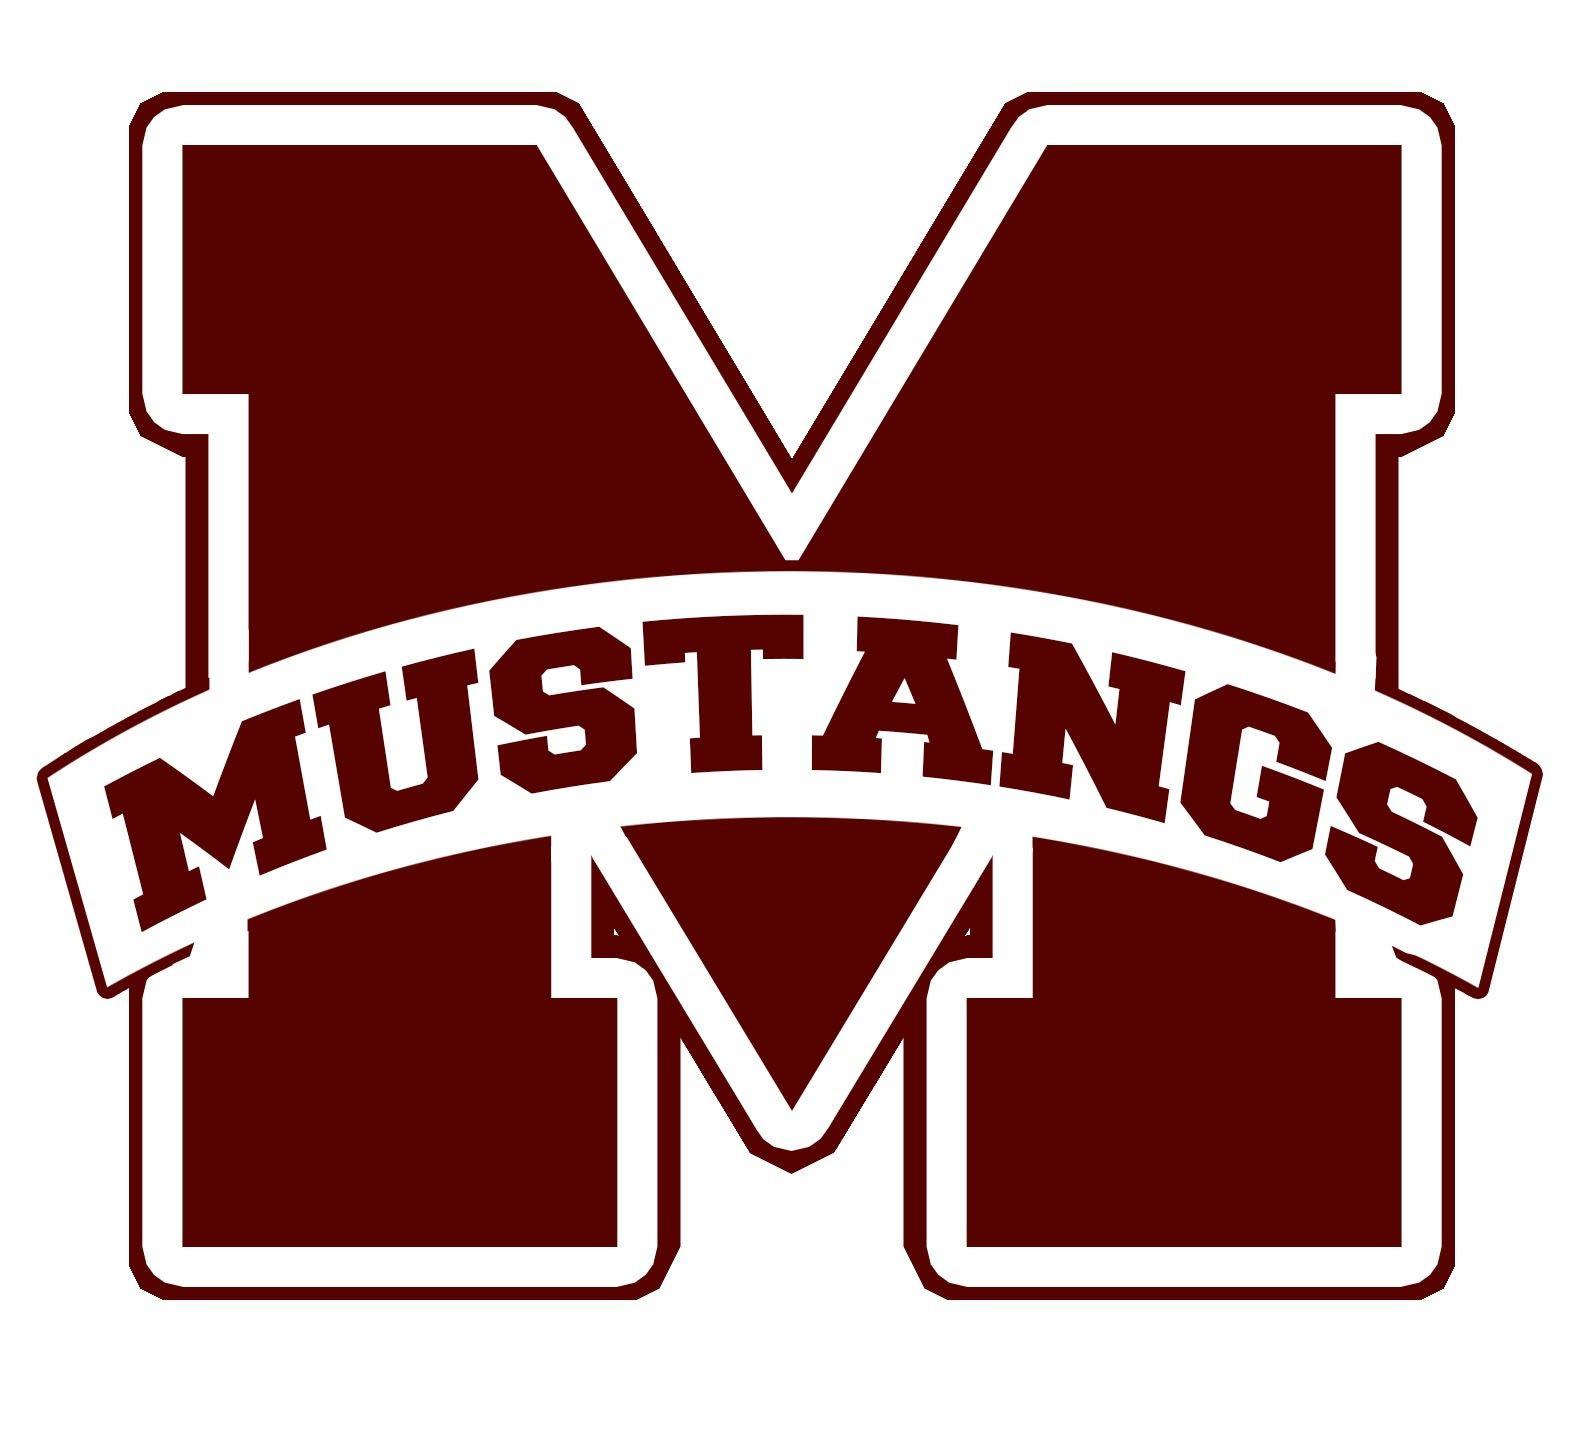 Mustang Football Logo - Image result for mustang football logo | That's A Great Idea.. Love ...